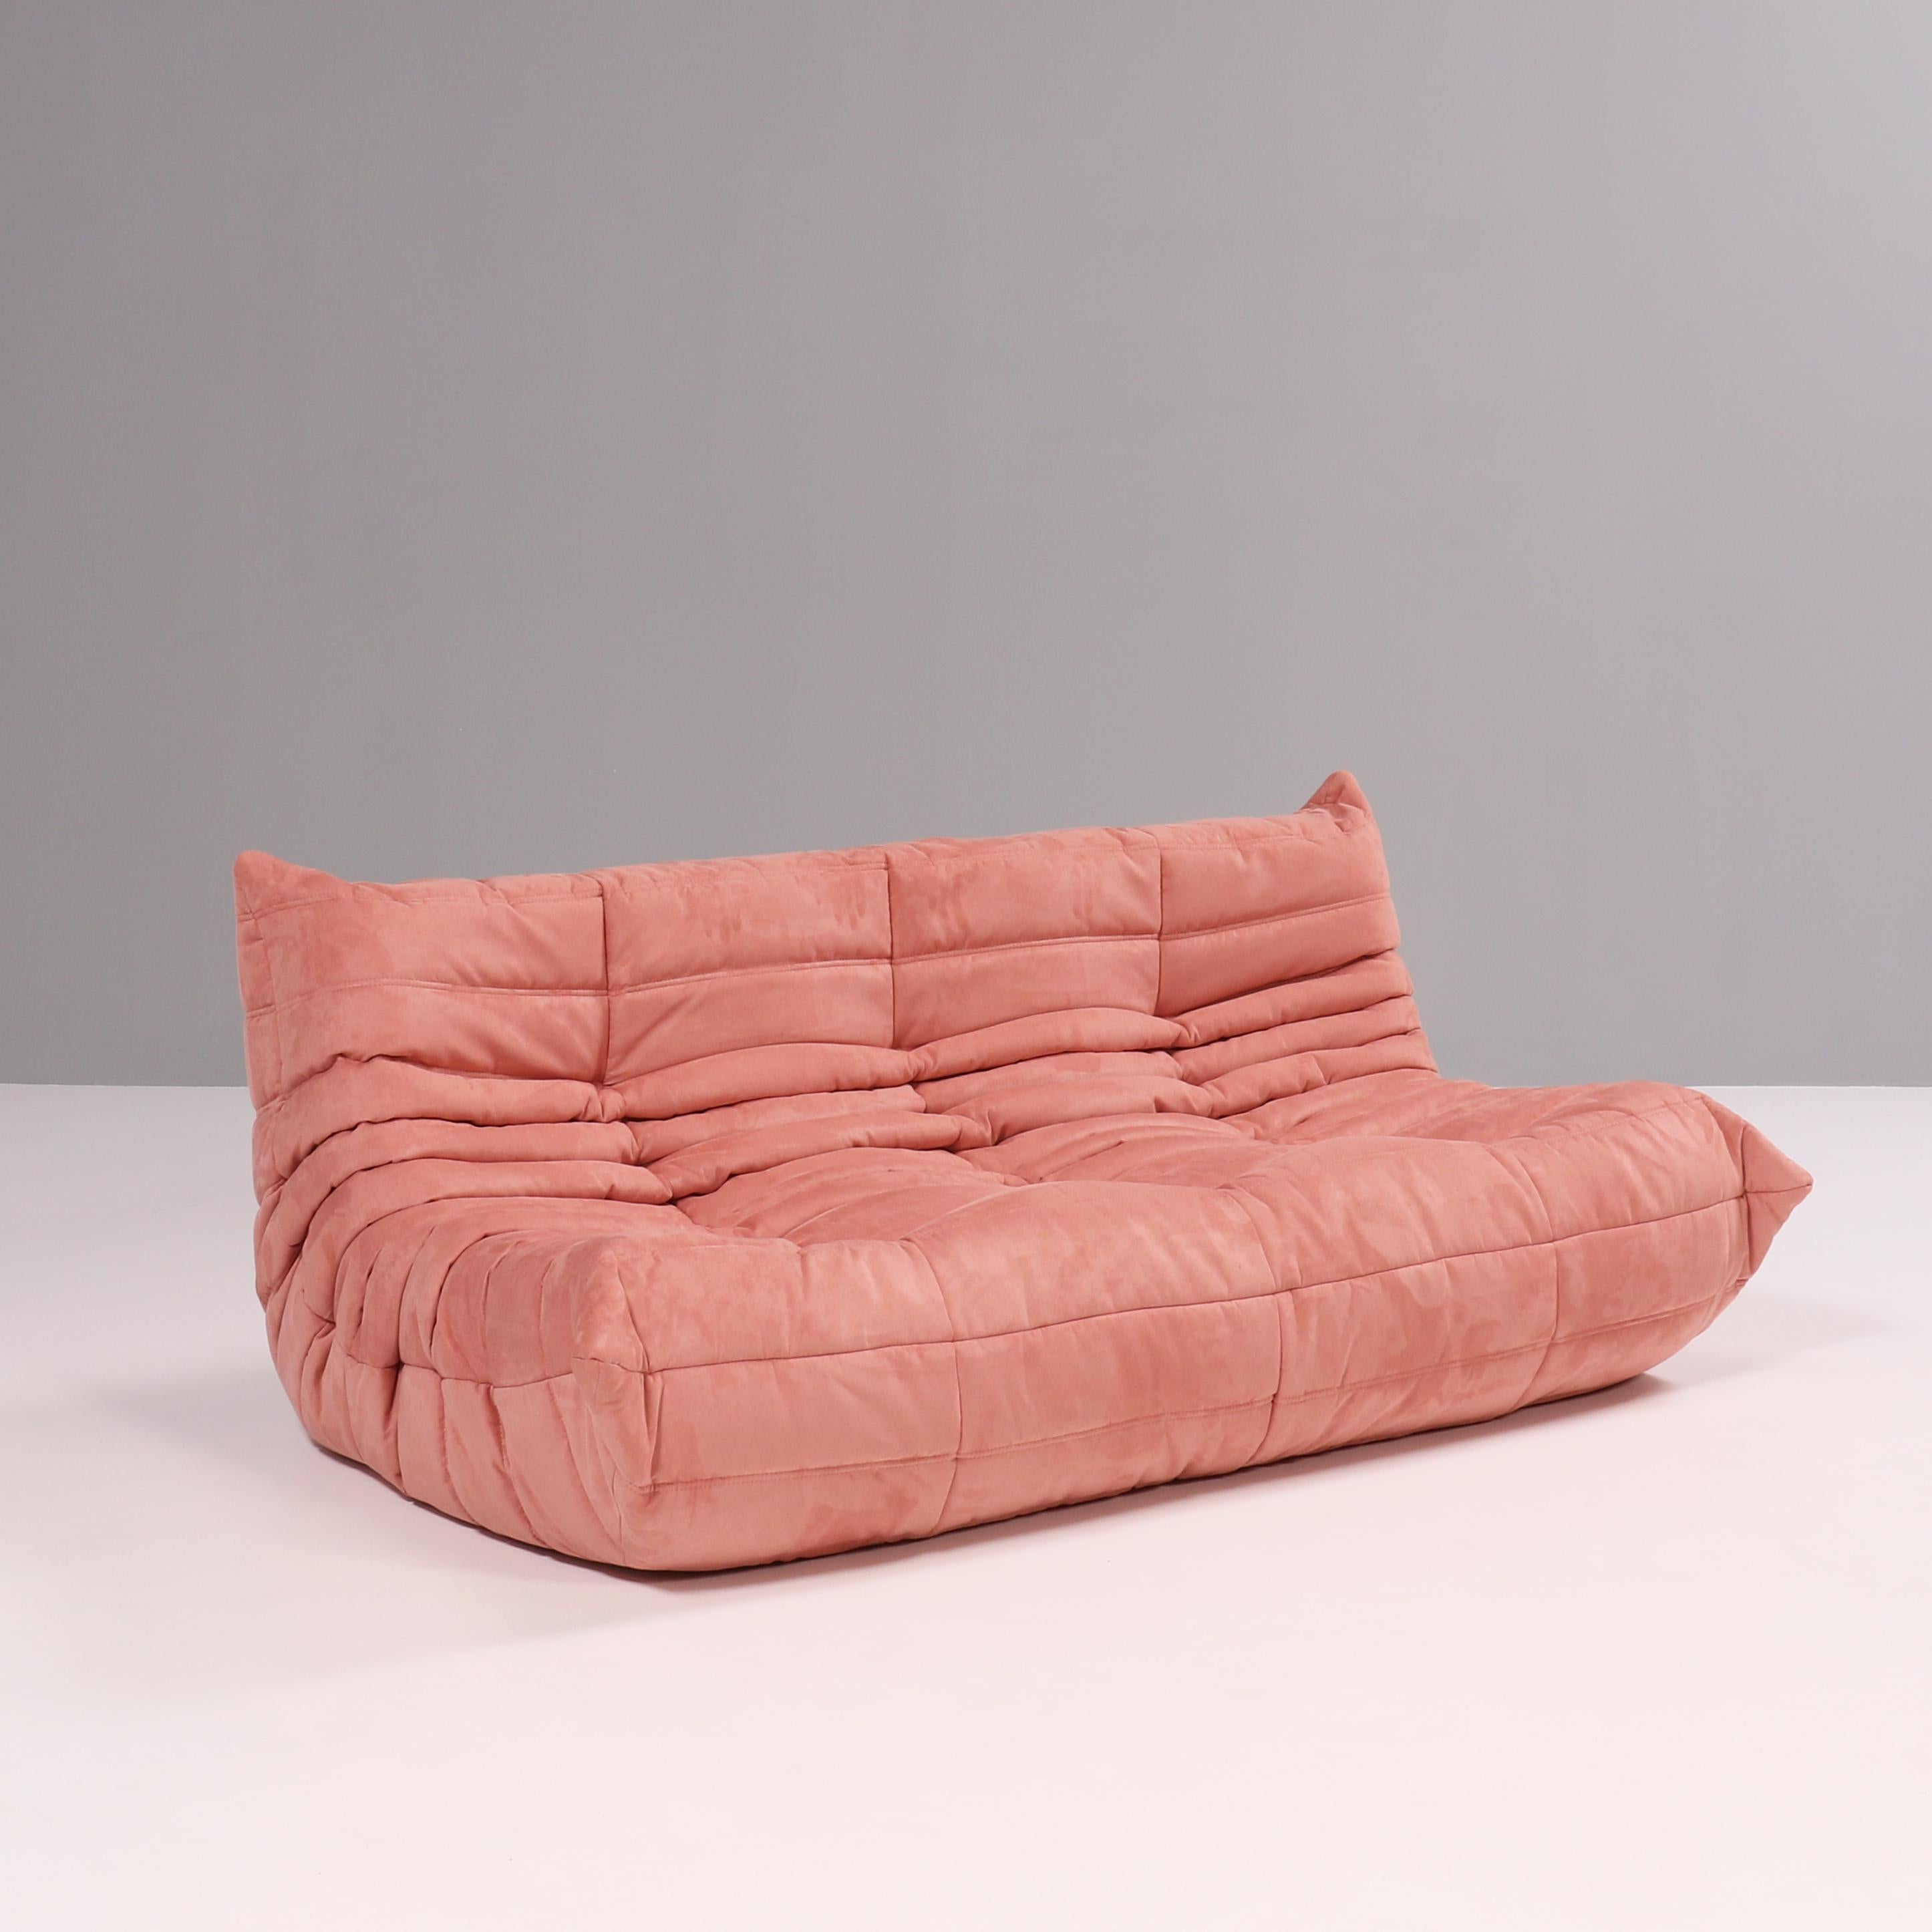 Late 20th Century Ligne Roset by Michel Ducaroy Togo Pink Modular Sofa and Footstool, Set of 4